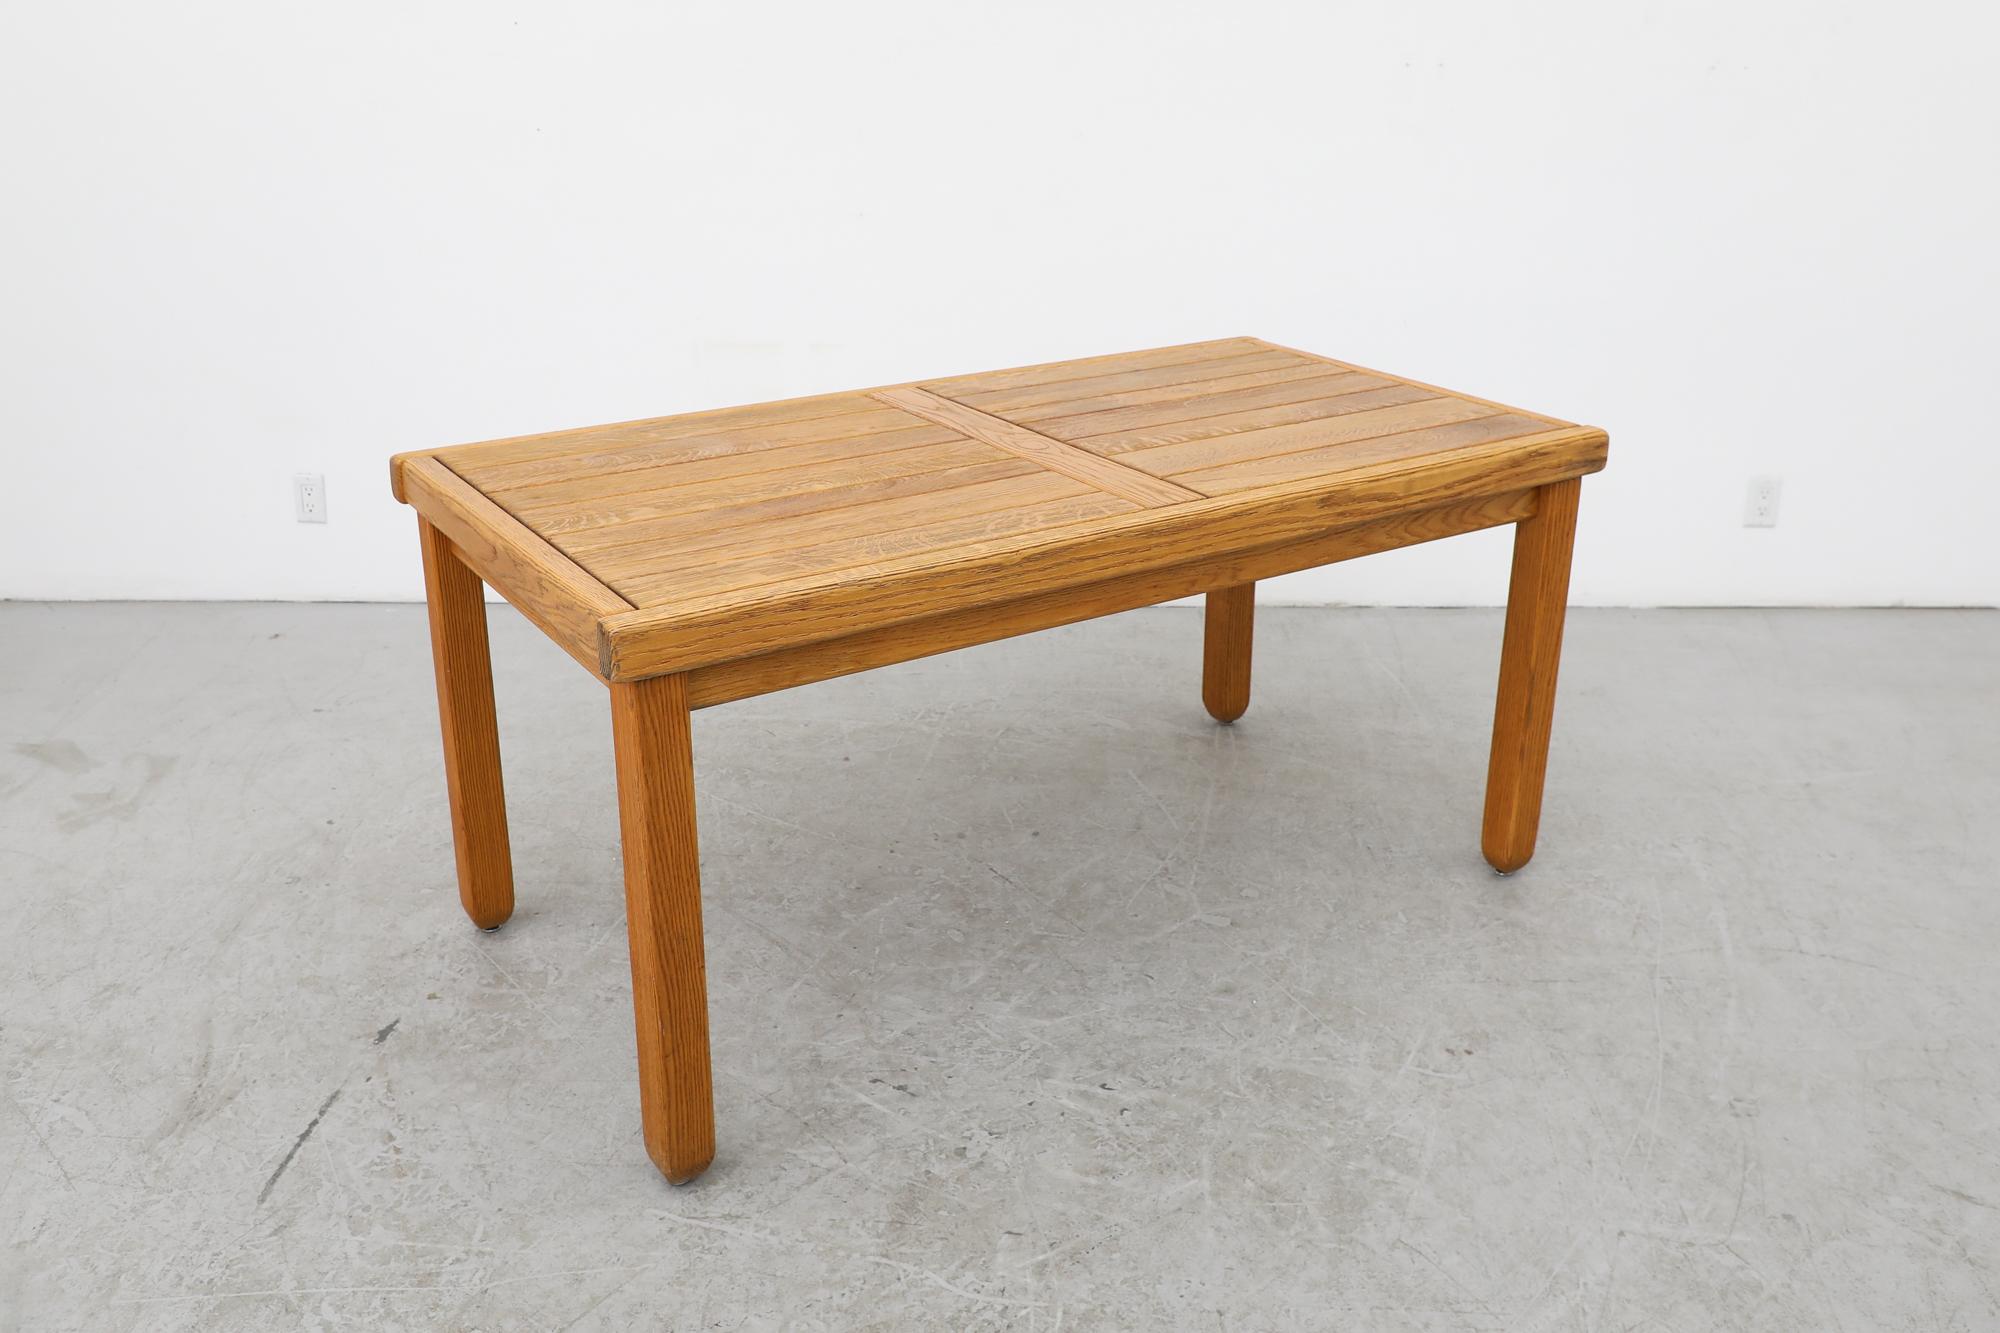 20th Century Brutalist Belgian Slatted Oak Dining Table w/ Rounded Legs Attributed to DePuydt For Sale